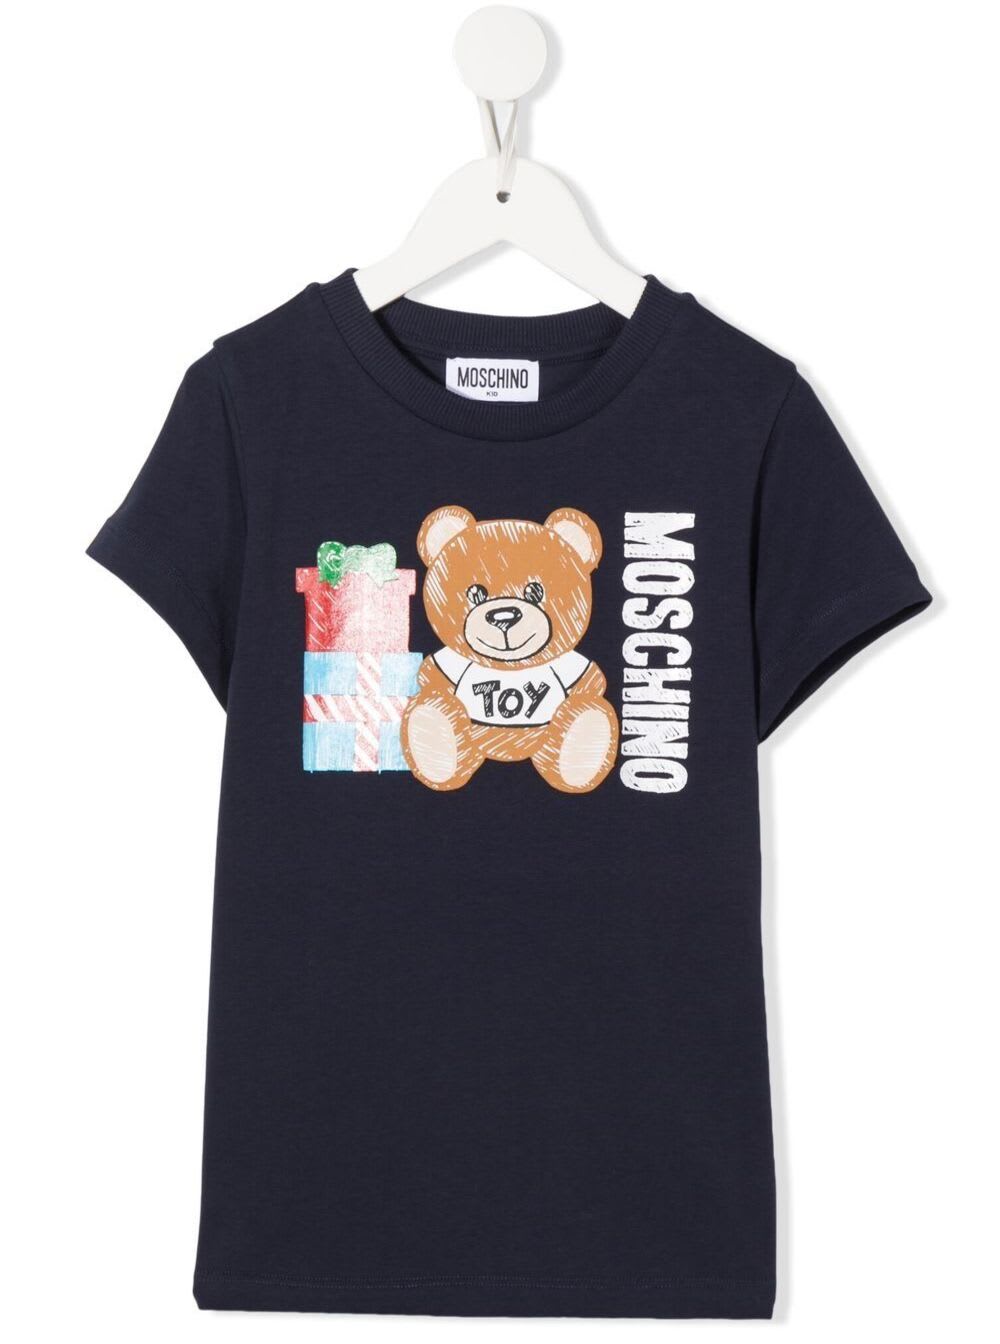 Moschino Black T-shirt In Cotton And Elasten With Teddy Bear Print On The Front